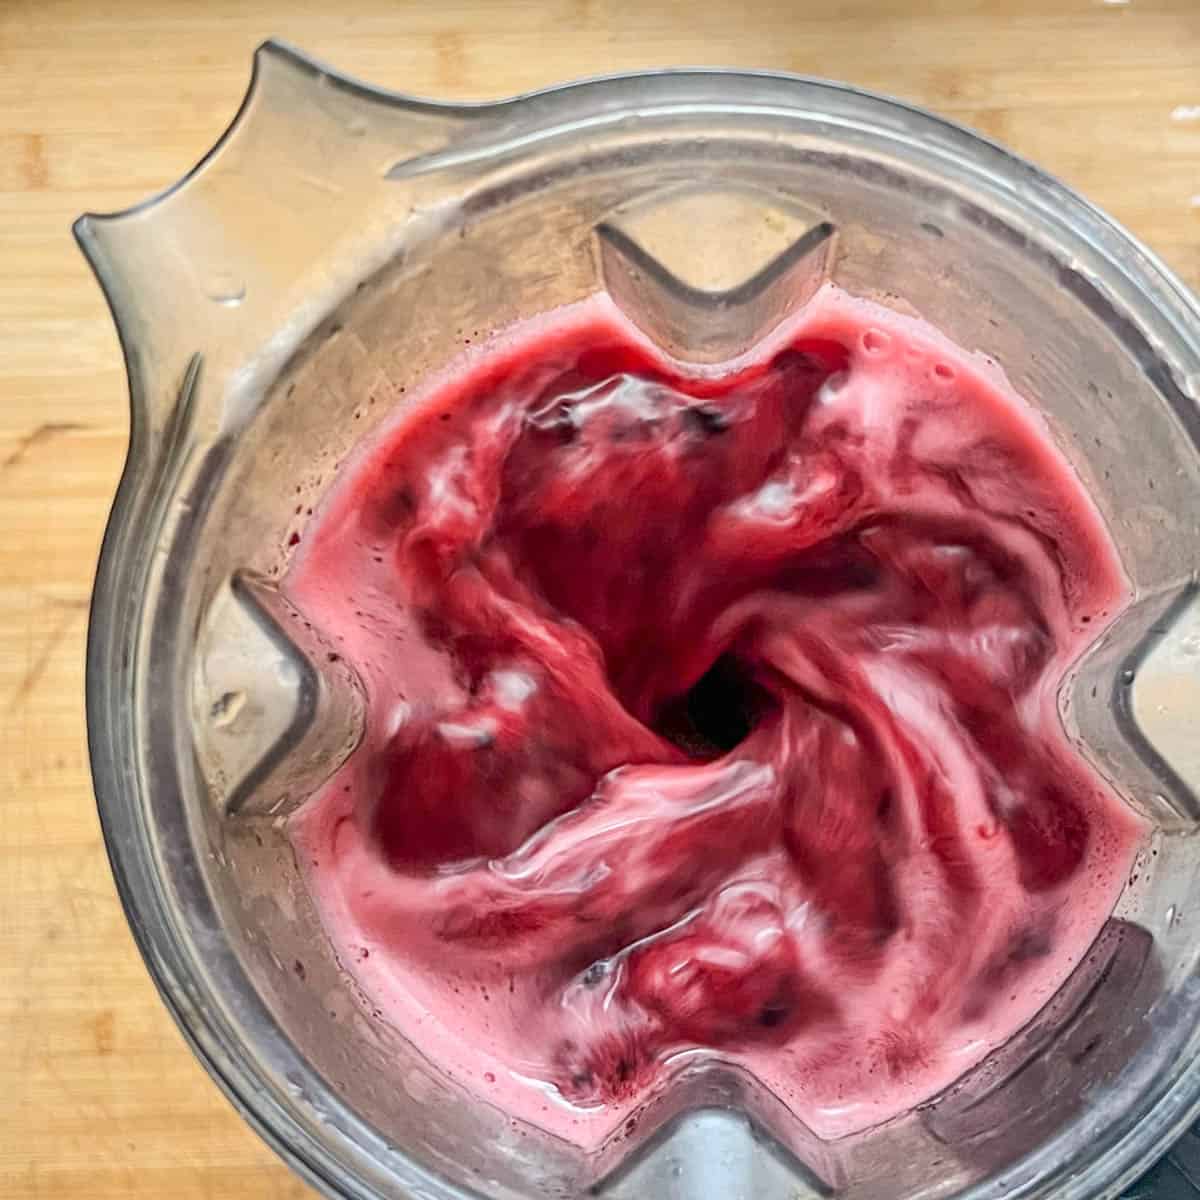 pureeing chokeberry cider in a blender